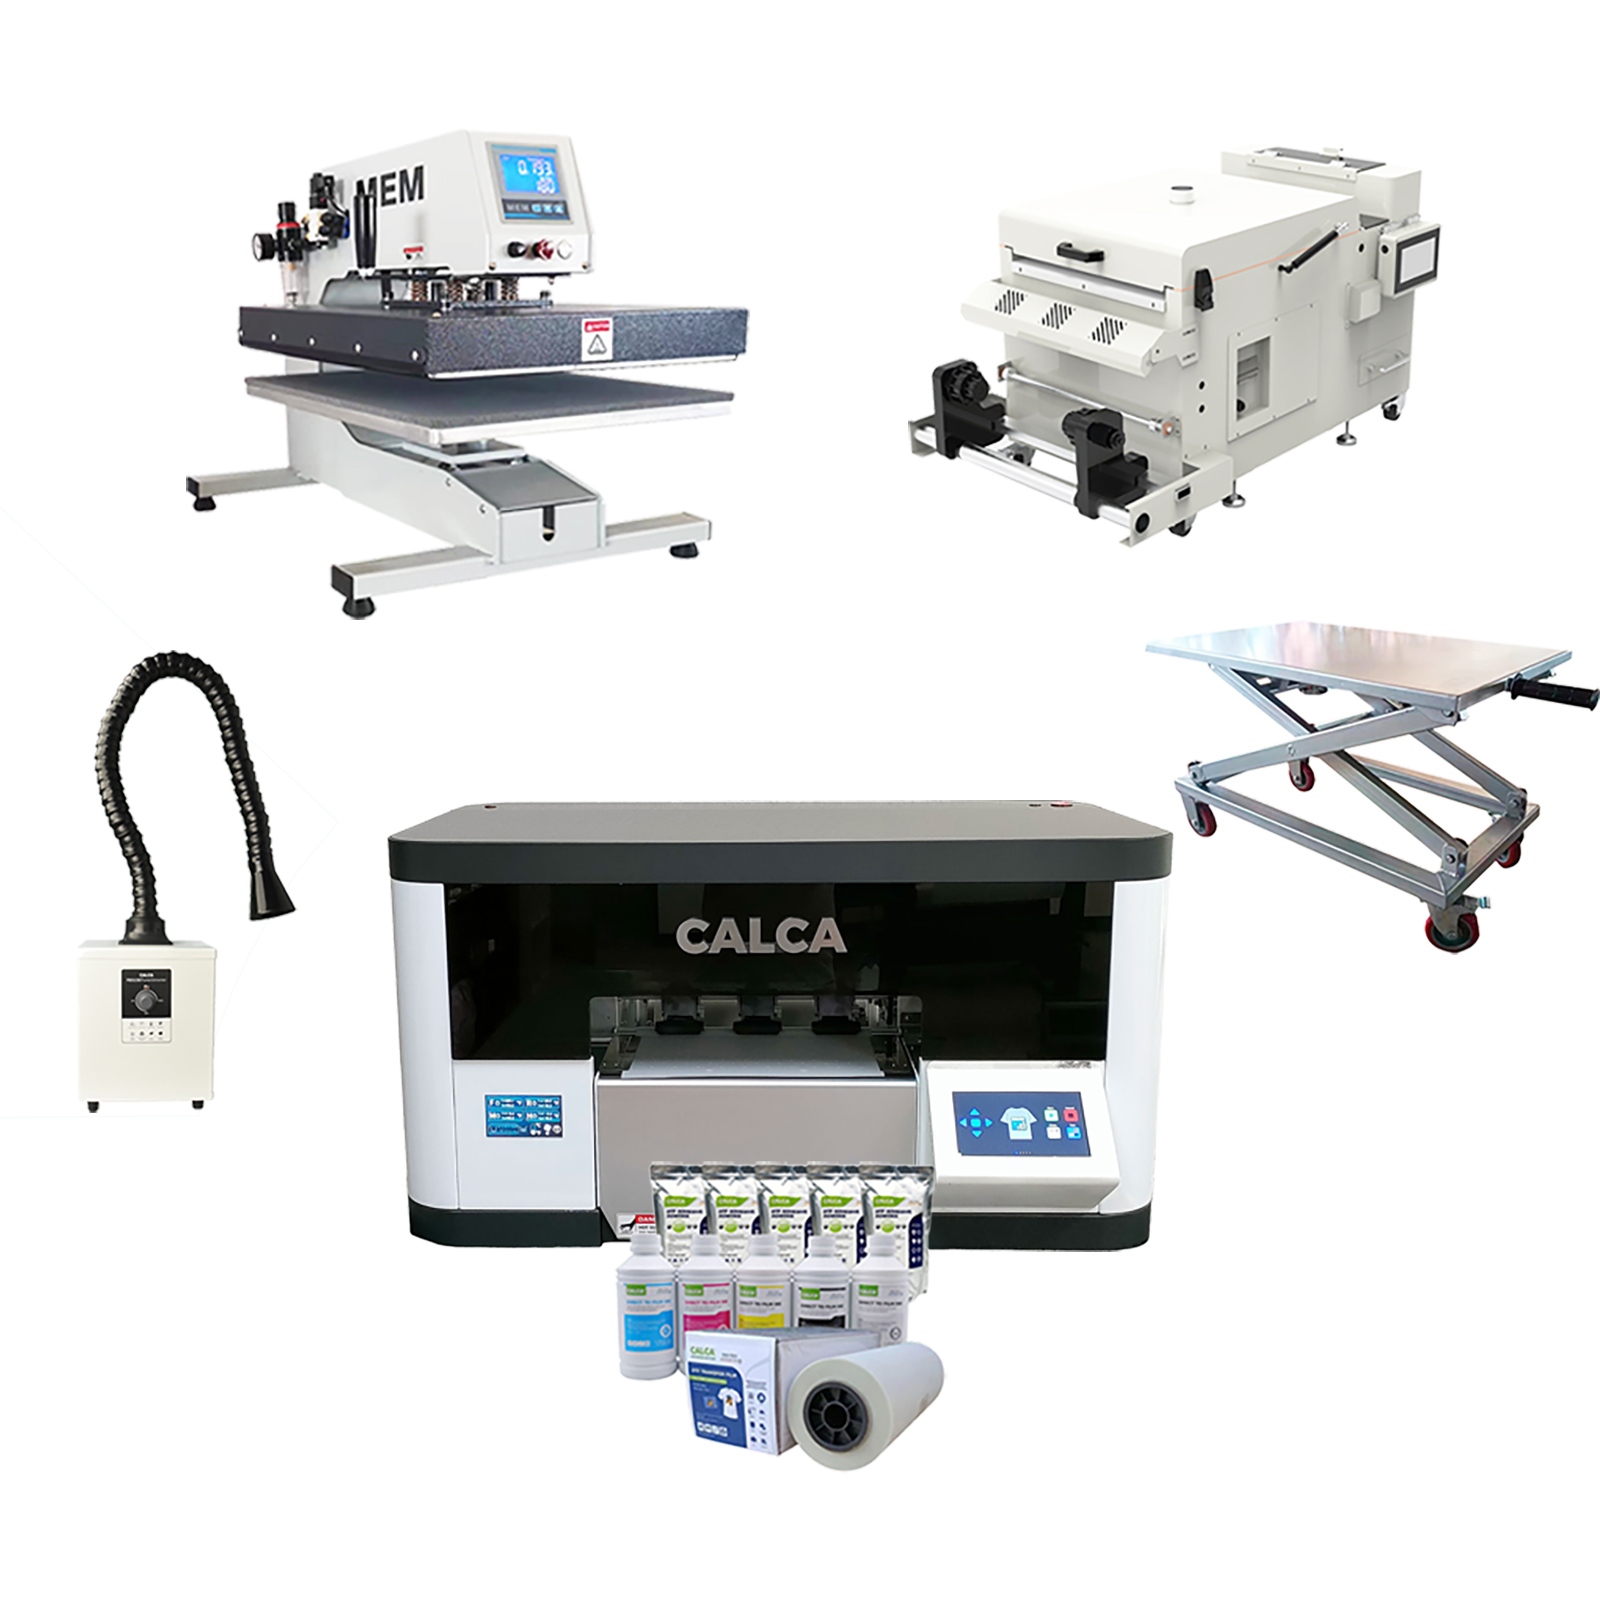 CALCA ProStar13 Wifi DTF Printing System Bundle with All The Necessary Supplies